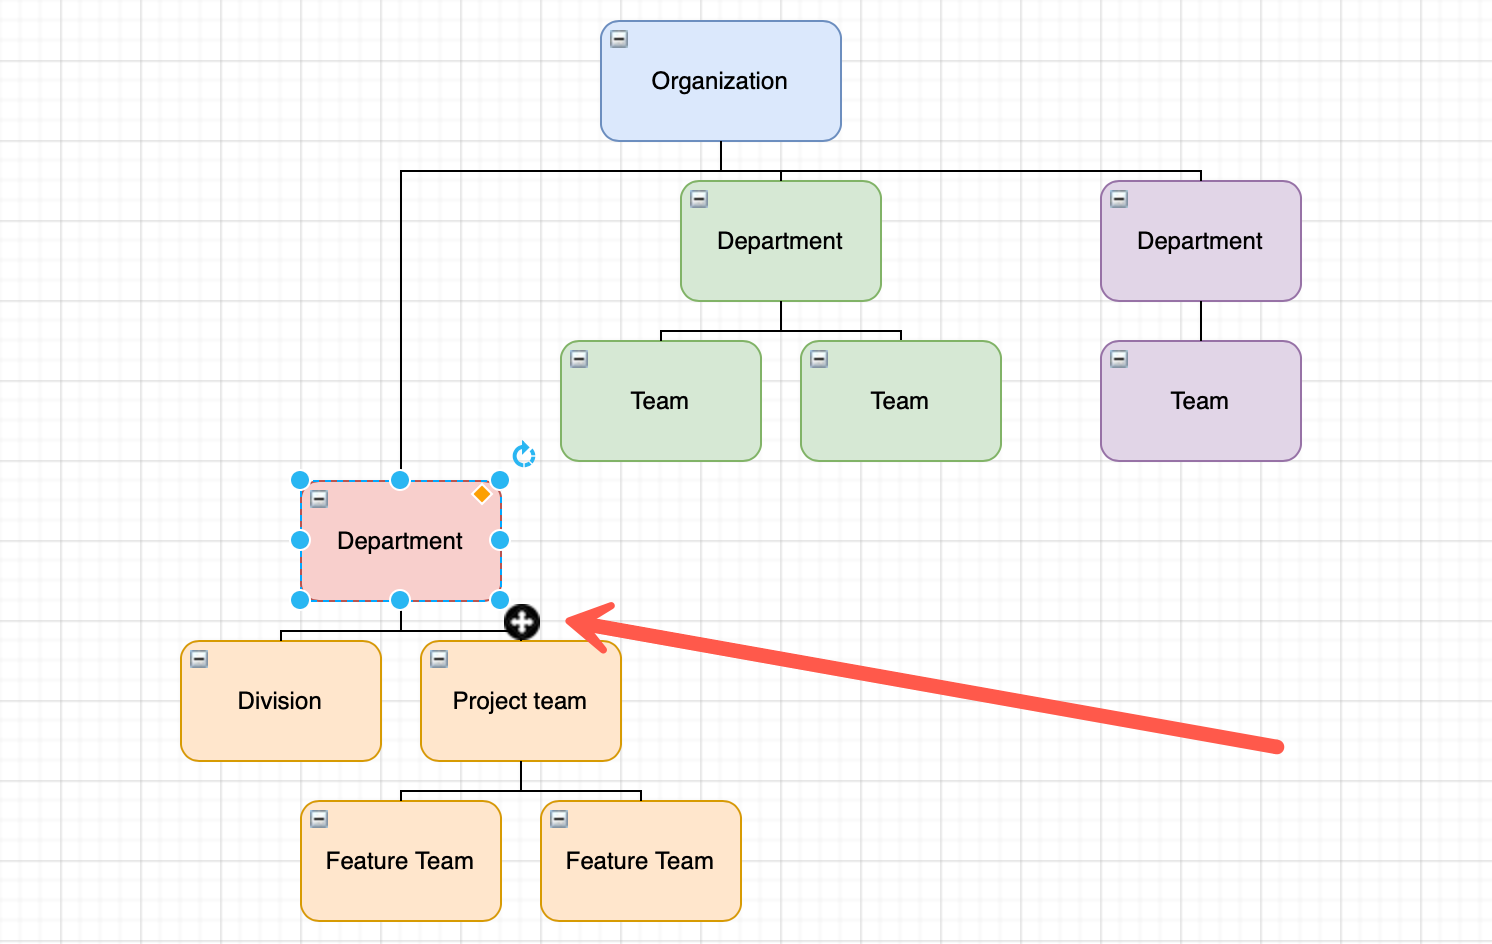 Move an entire branch in your org chart in draw.io